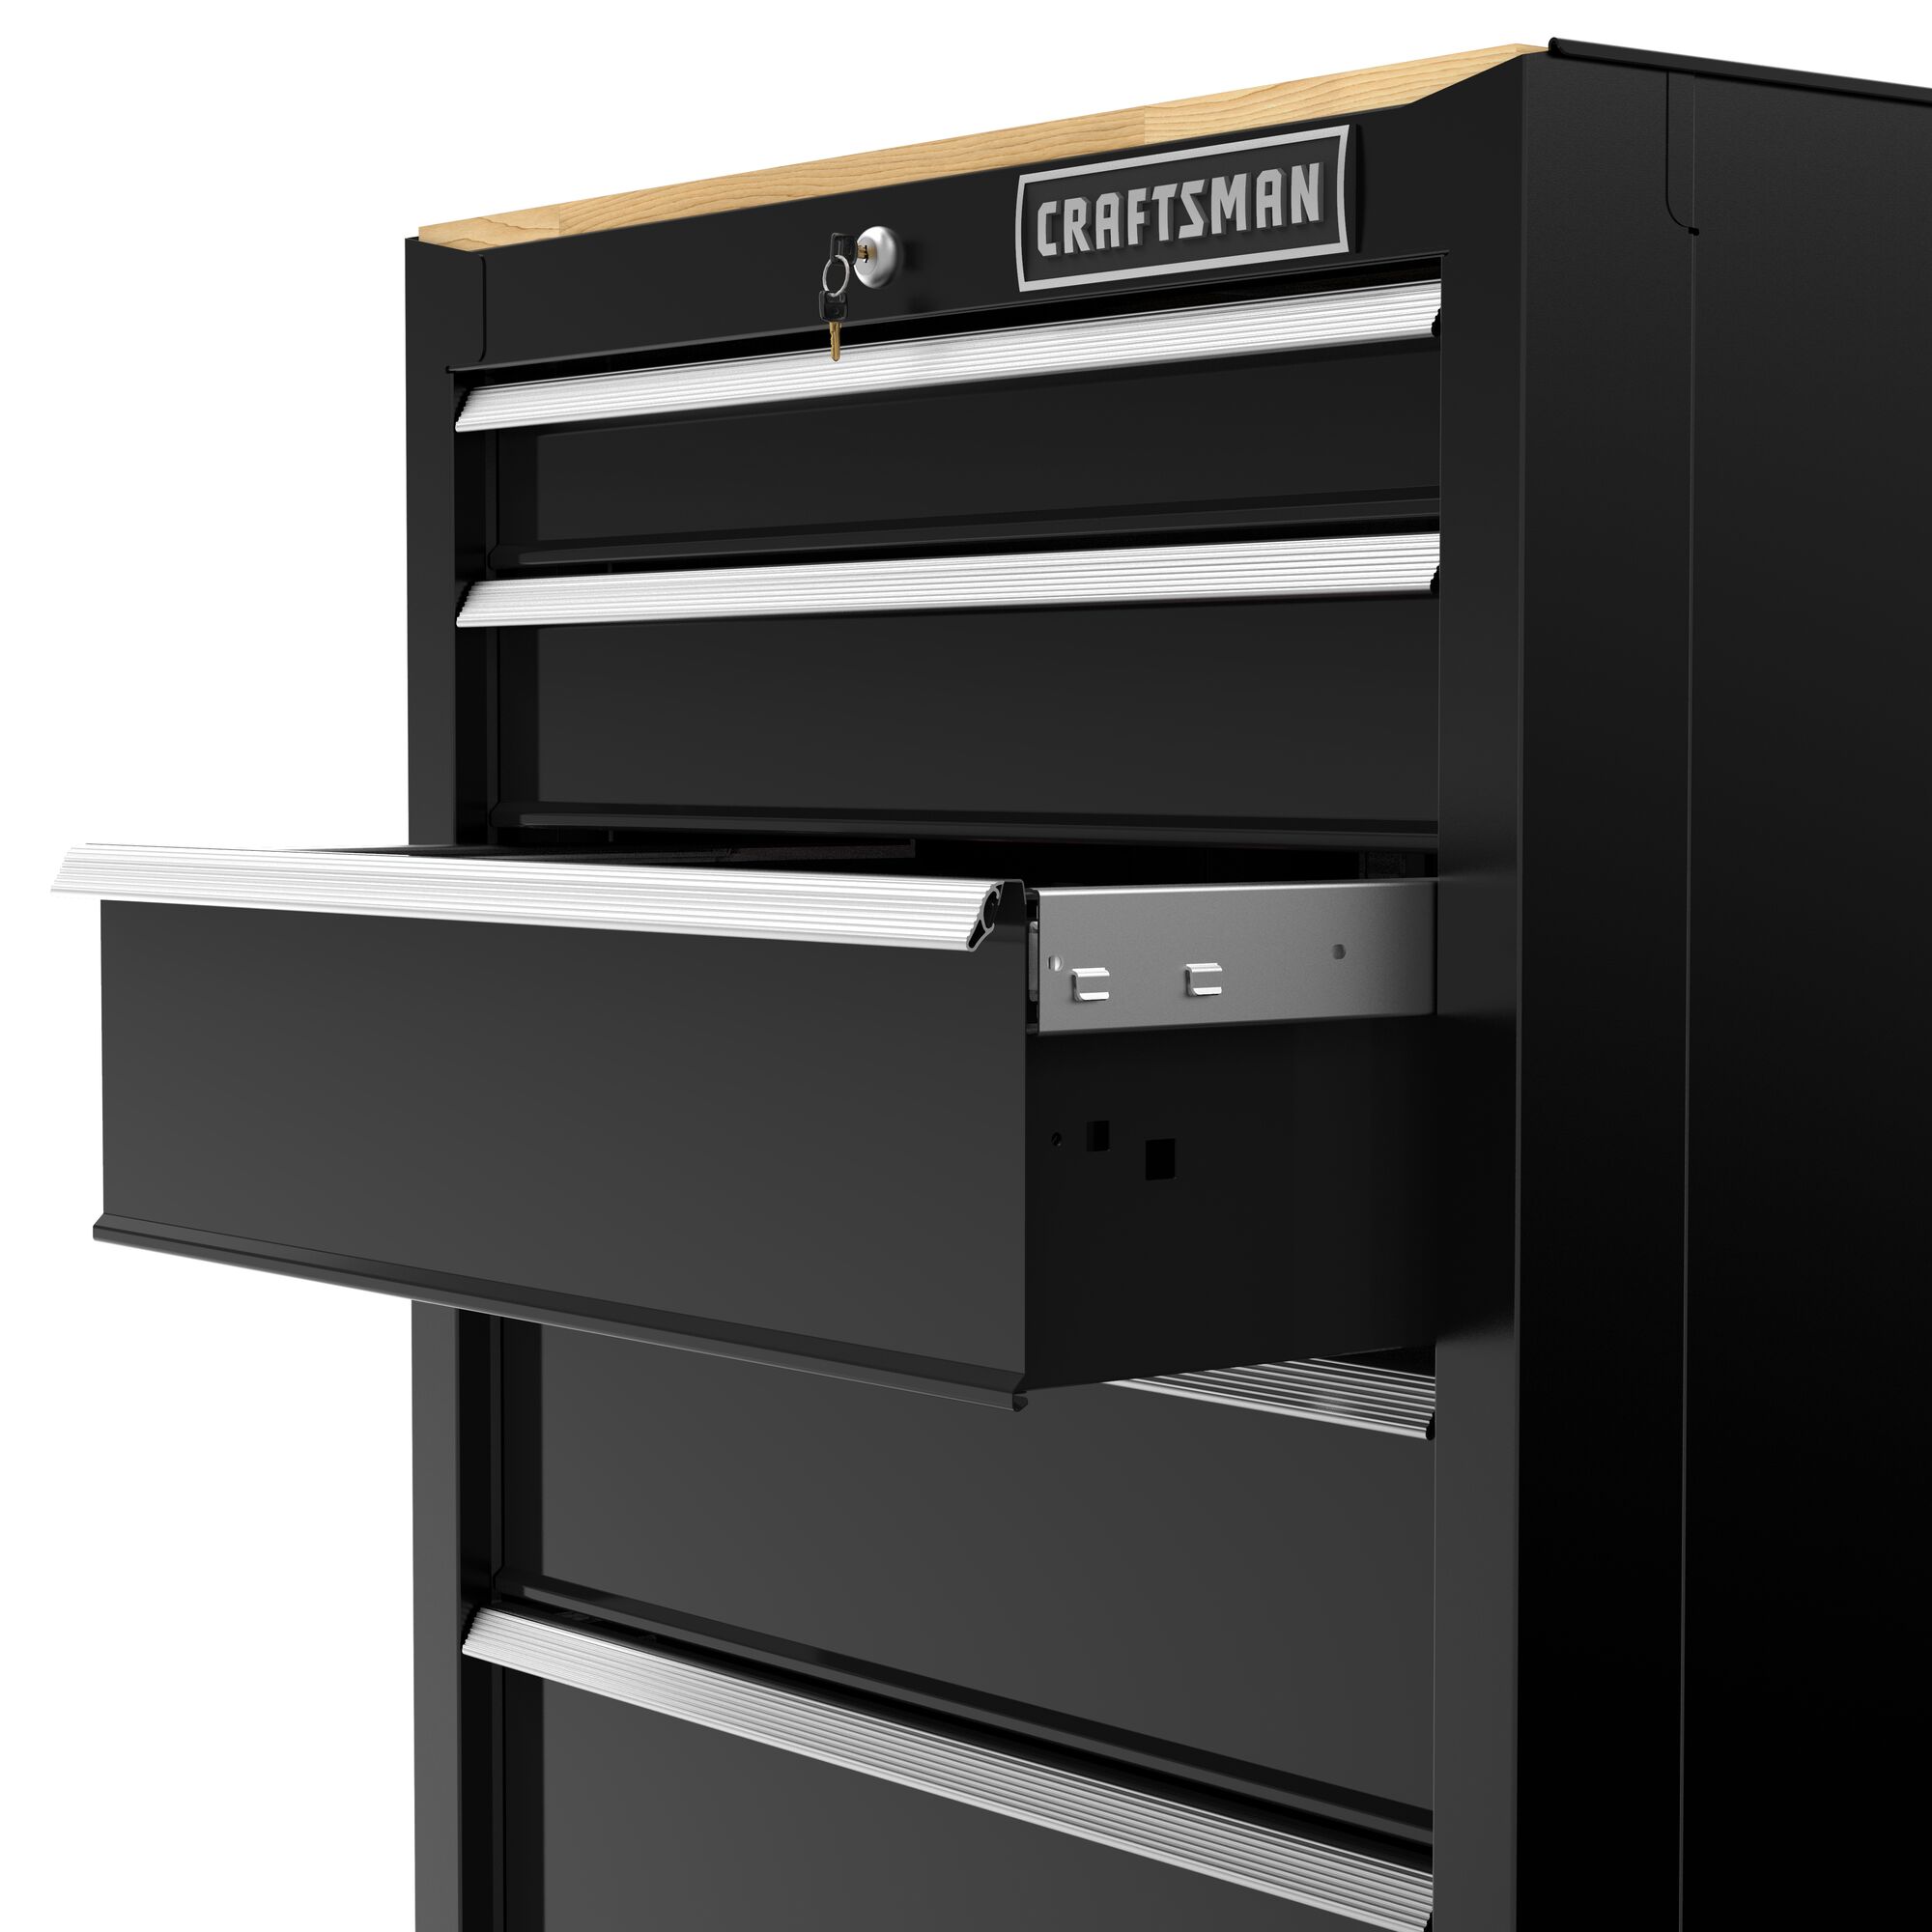 CRAFTSMAN 26.5-in wide 5-drawer base cabinet angled view with drawer open